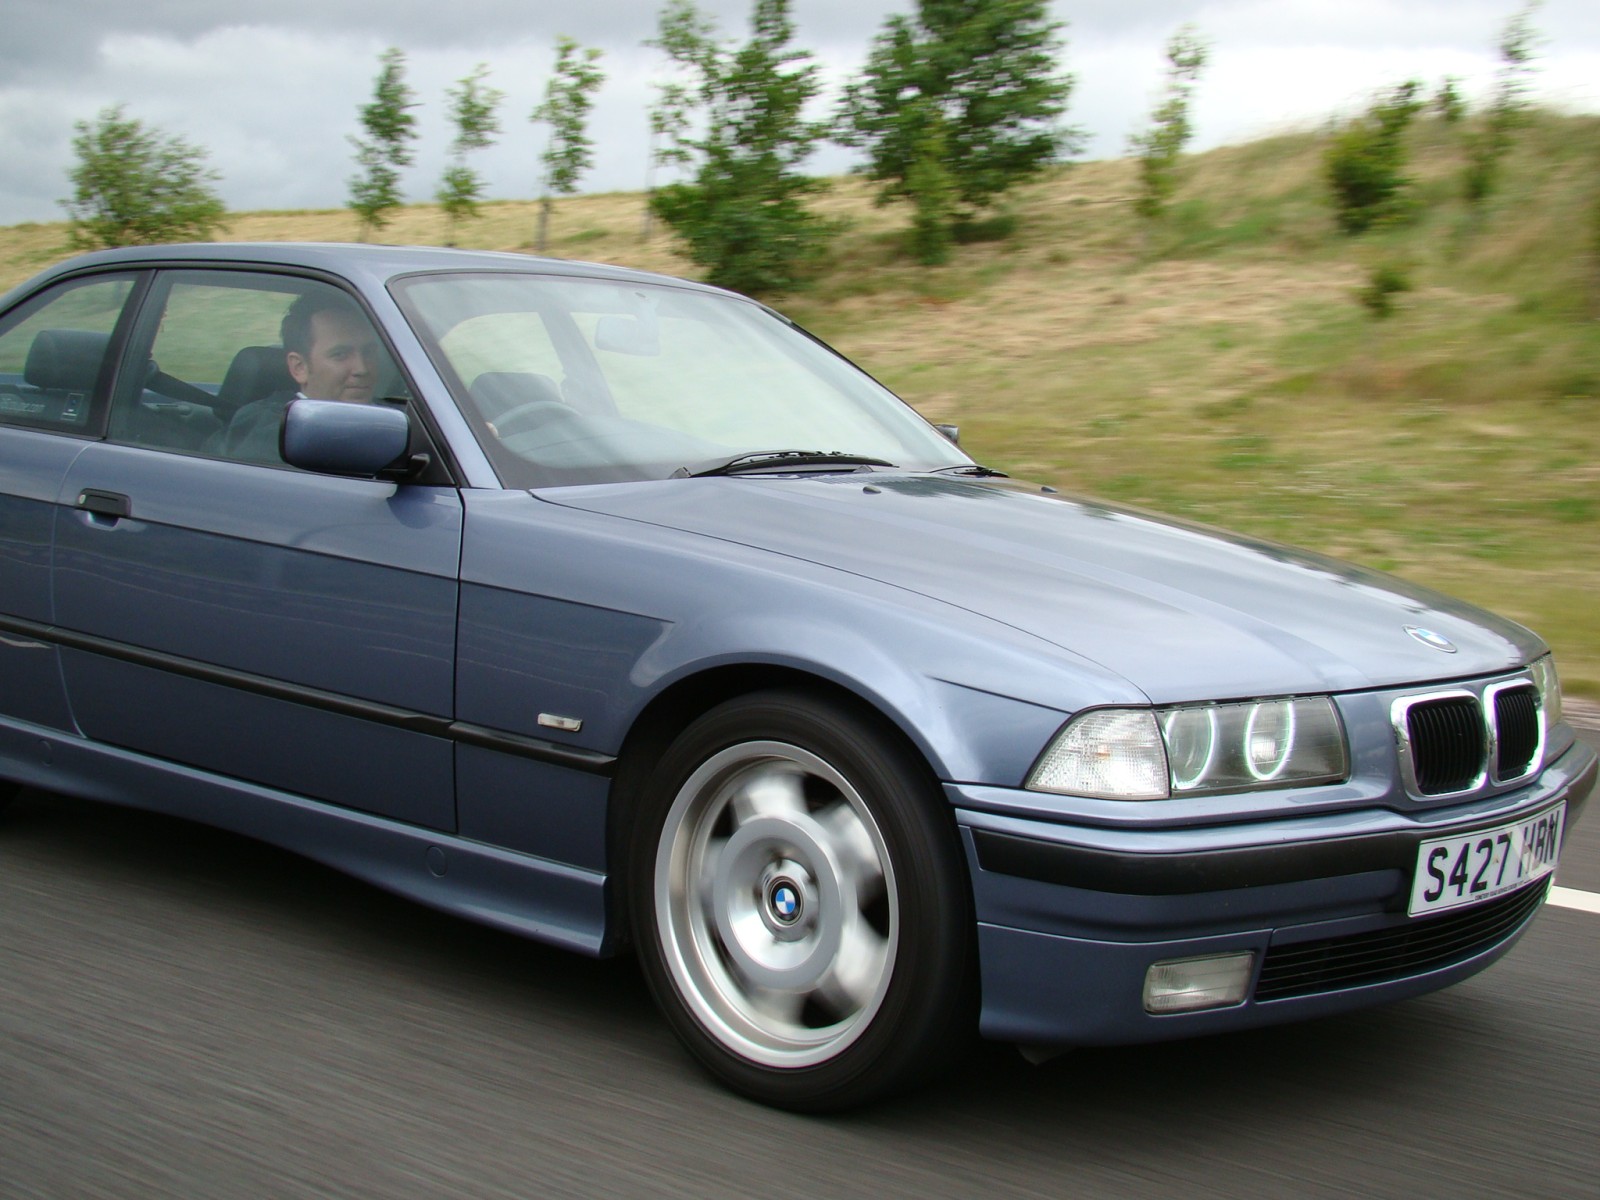 1998 Bmw 323i coupe review #1